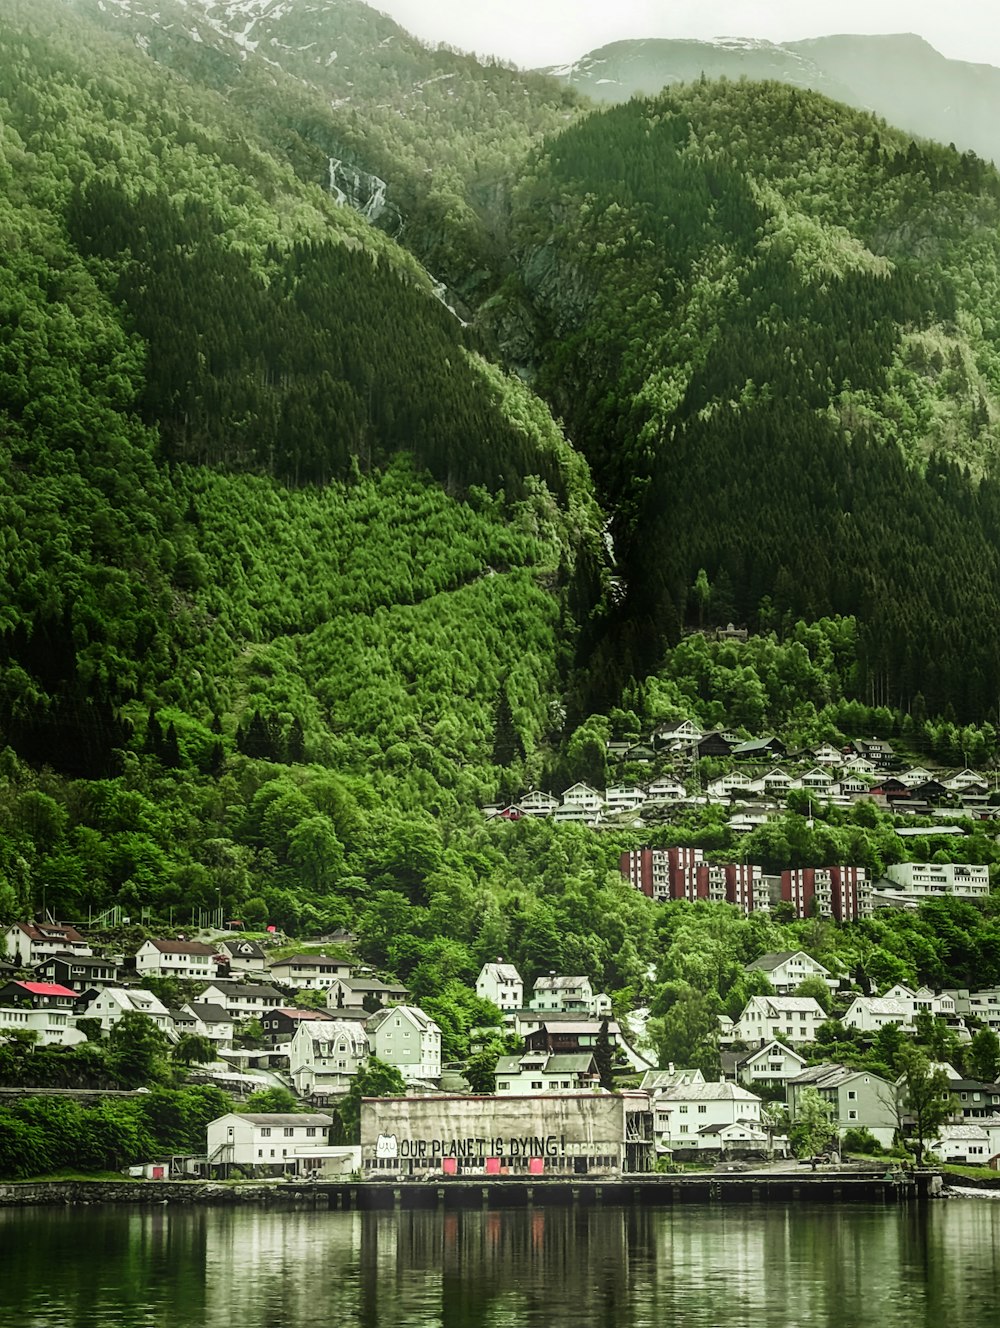 a scenic view of a small town on a mountain